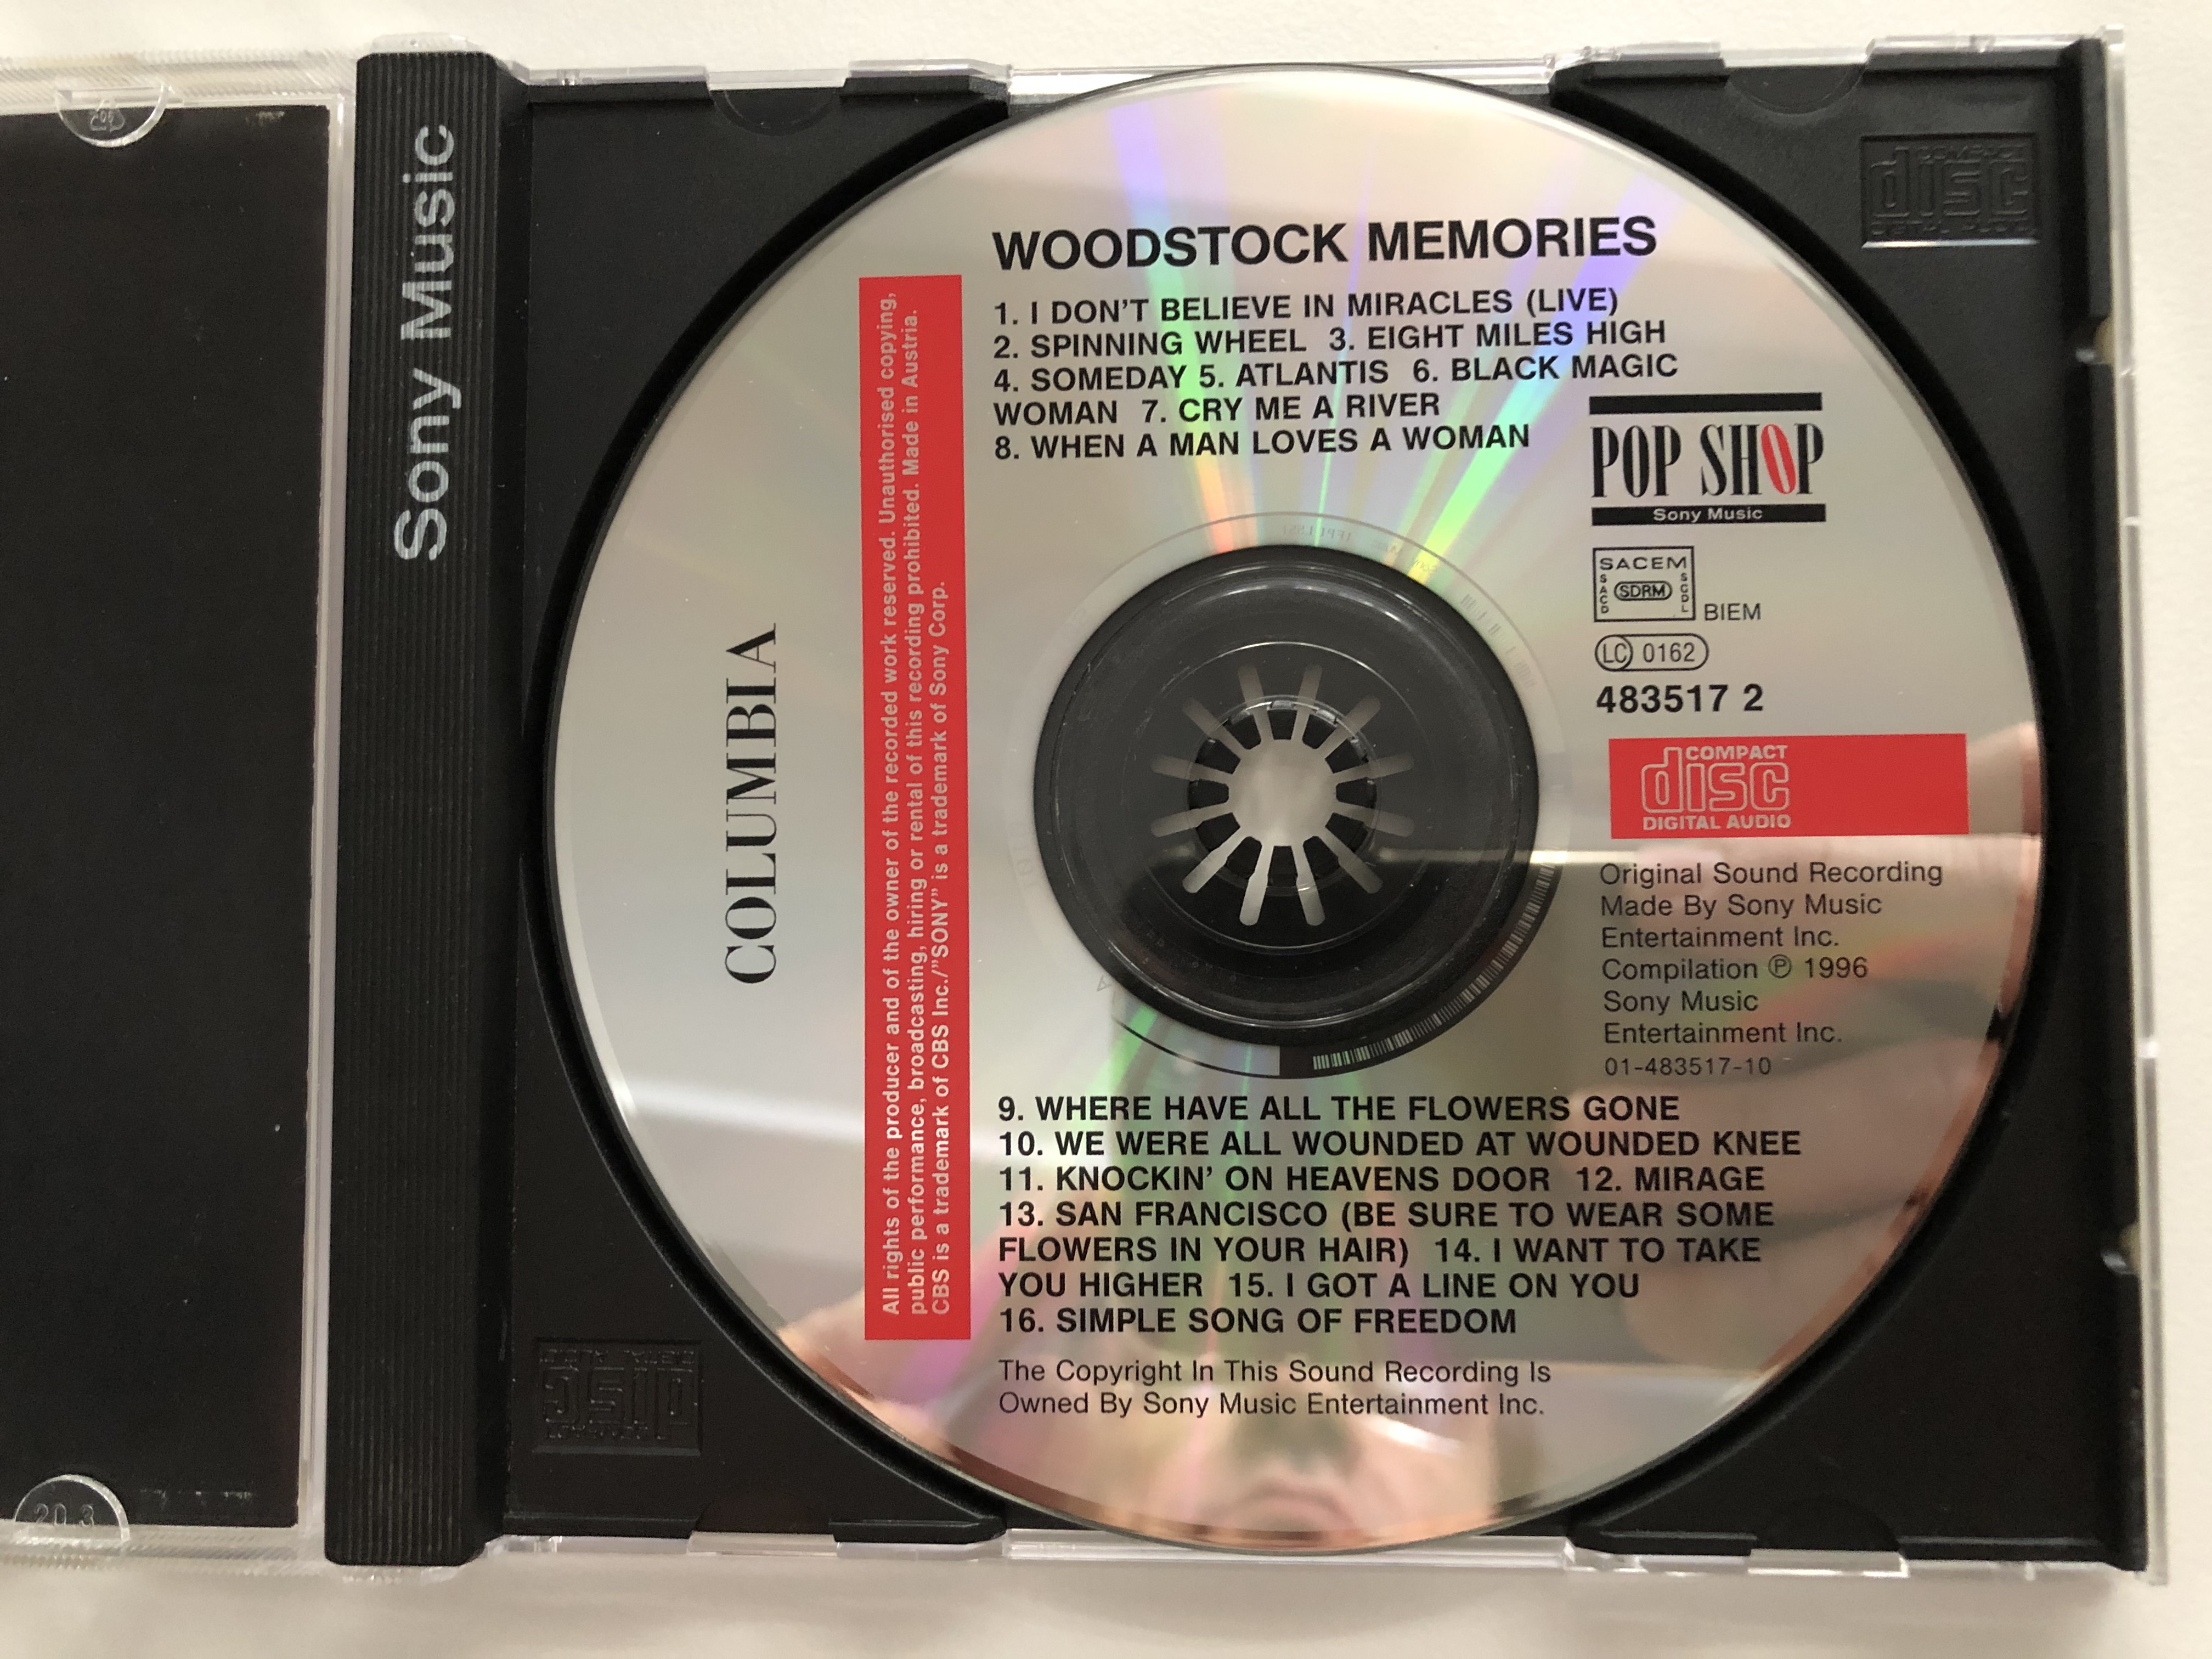 woodstock-memories-argent-i-don-t-believe-in-miracles-live-blood-sweat-and-tears-spinning-wheel-byrds-eight-miles-high-fleetwood-mac-black-magic-woman-columbia-audio-cd-1996.jpg